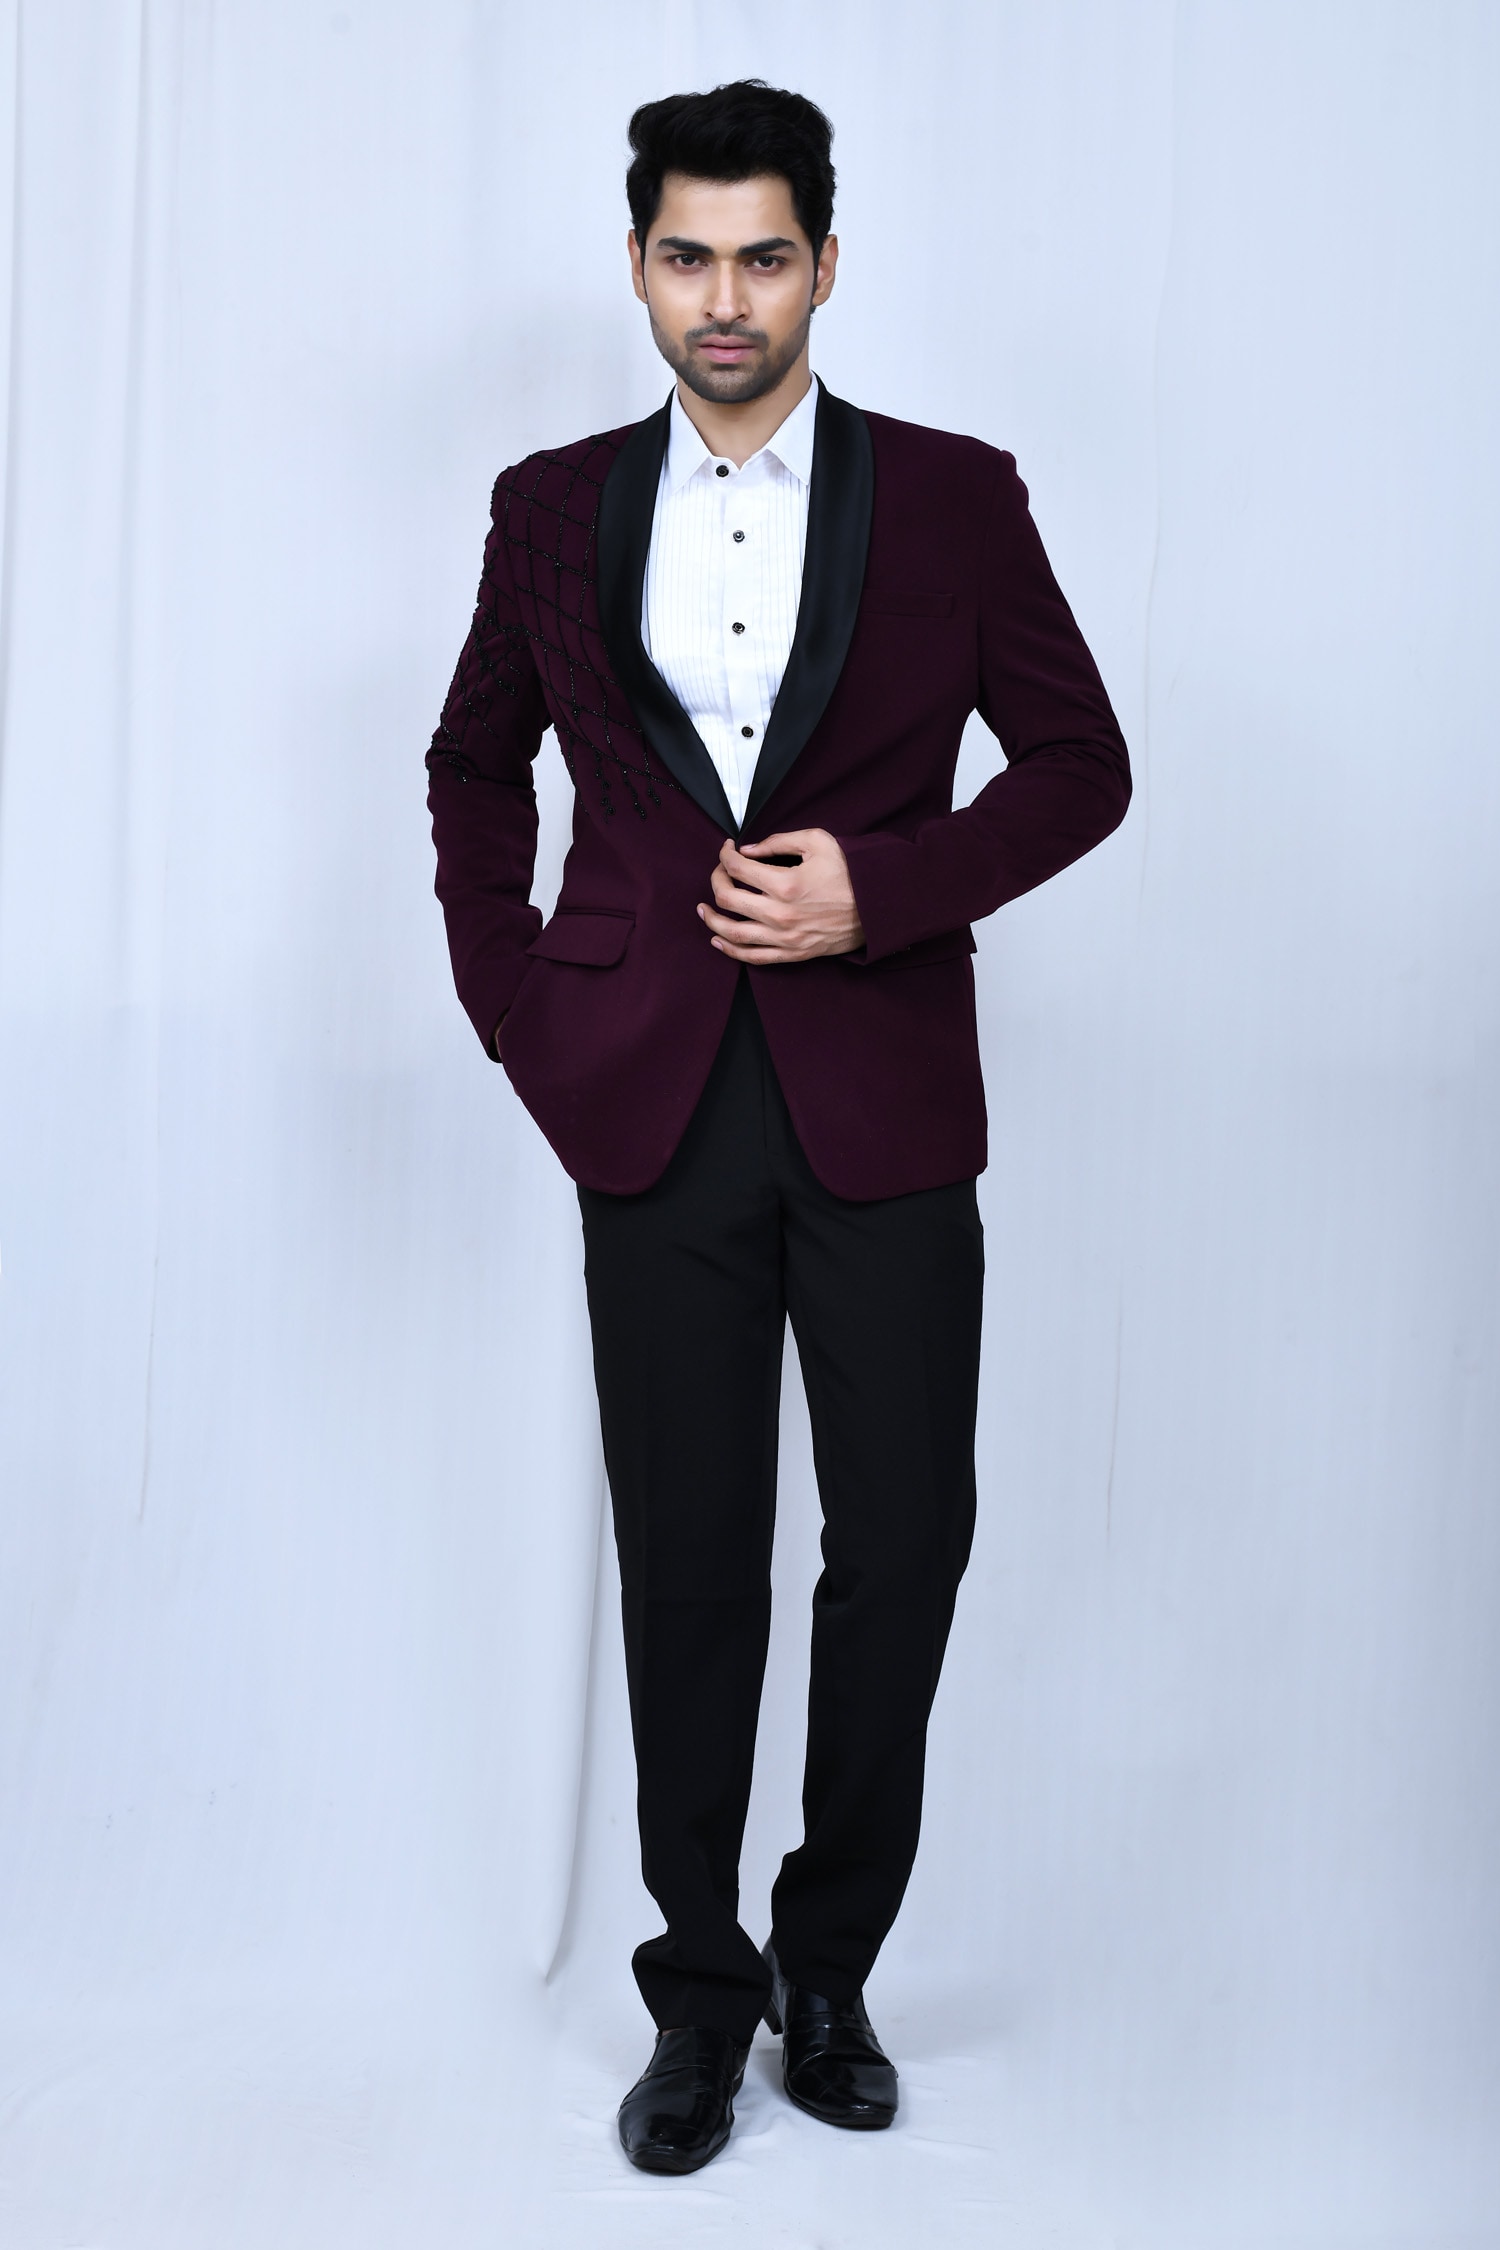 Classy  1 Navy Blazer  Neutral Trousers The bread and butter of  separates navy and neutral are complementary colors The biggest issue  with navy and neutral is that it can be